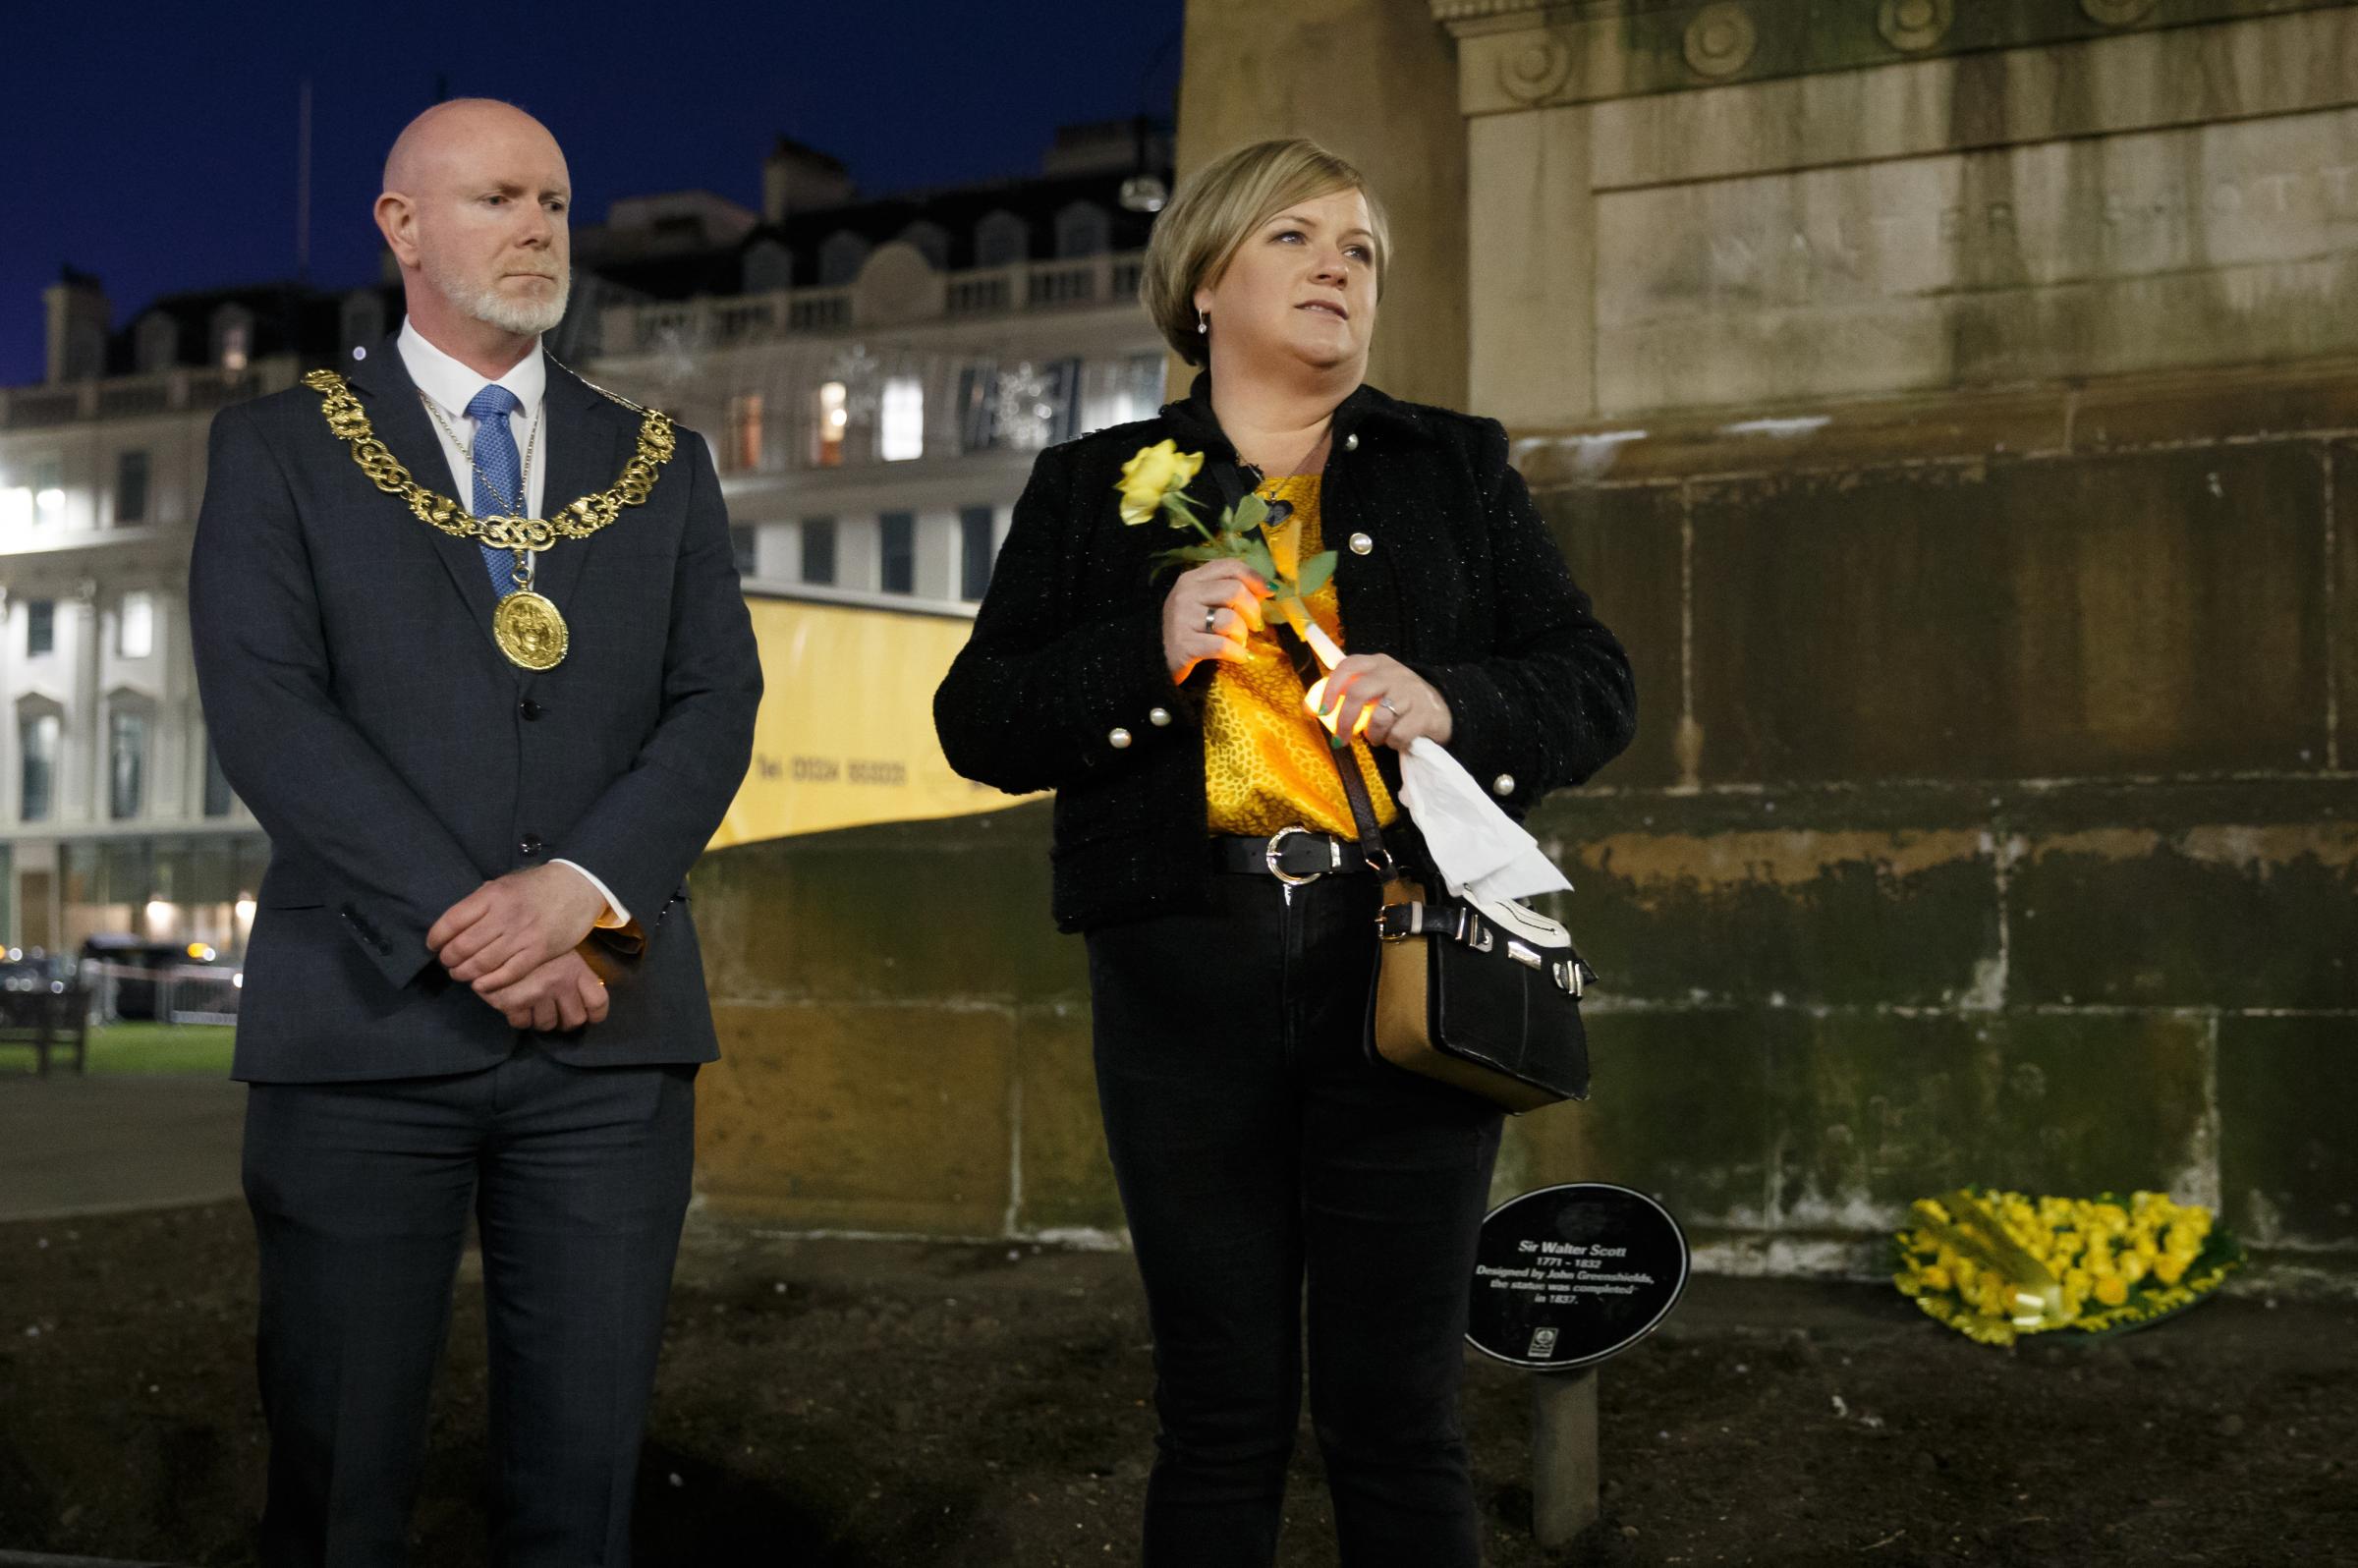 Vigil at George Square, Glasgow to mark the second national lockdown anniversary. The event attended by families who lost loved ones in the covid pandemic was organised by Covid 19 Families Scotland. Pictured is Connie McCready of Covid 19 Families